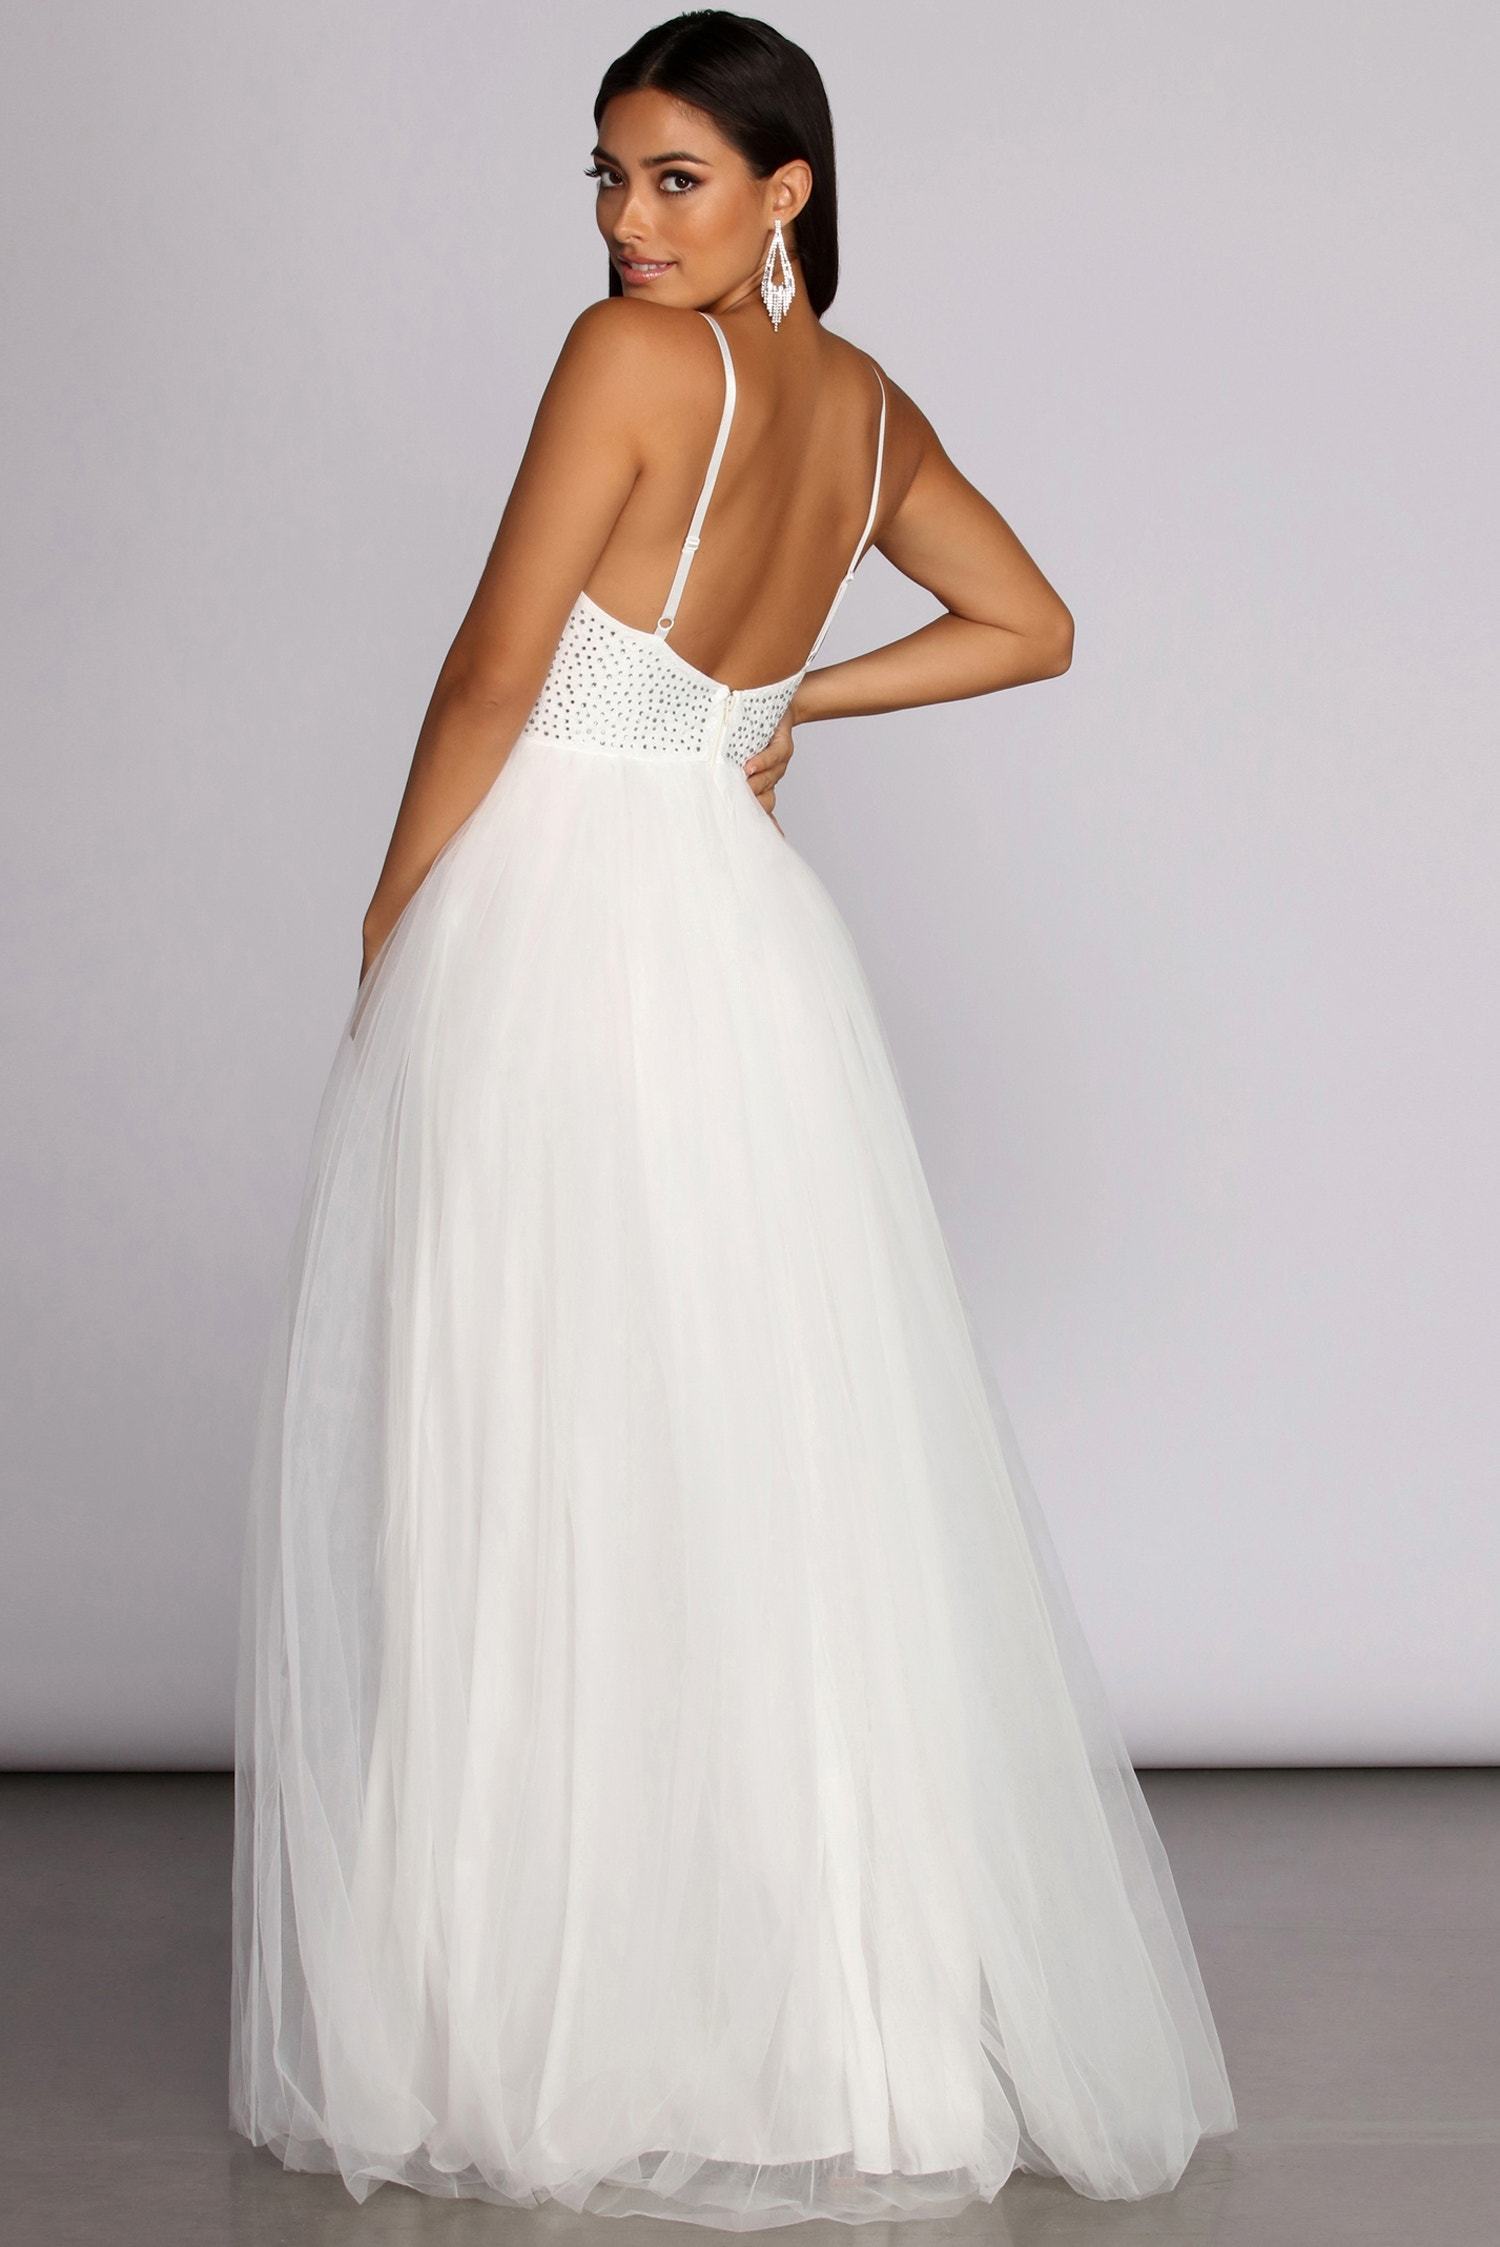 Graciela Heat Stone Tulle Gown